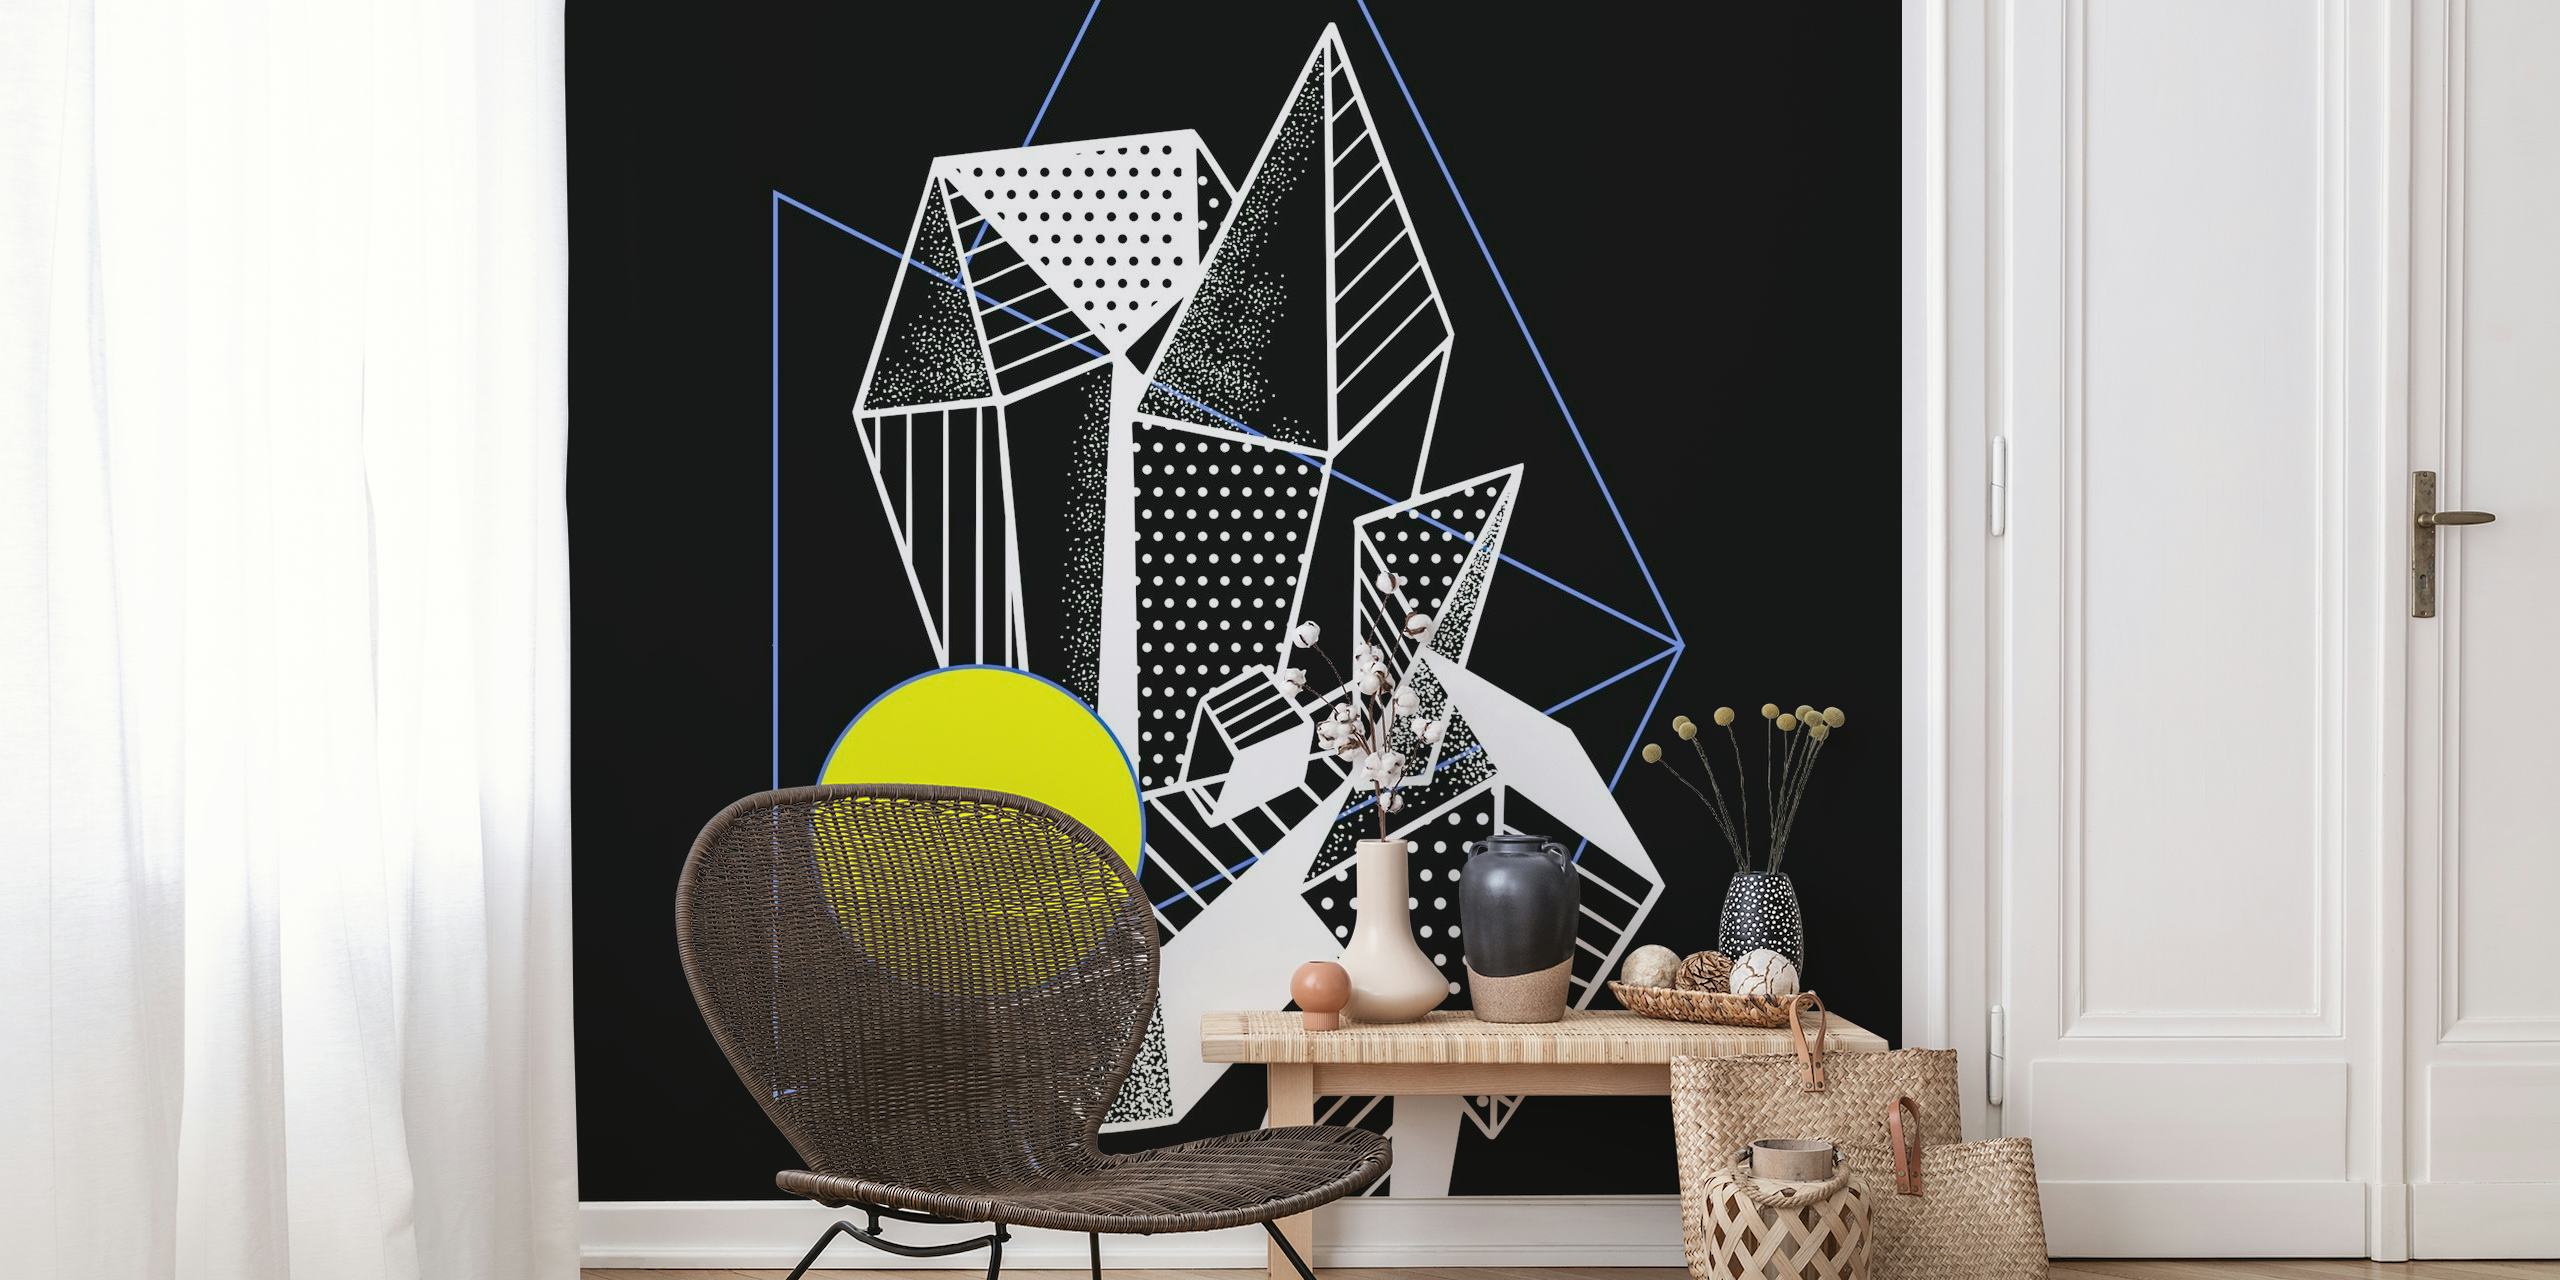 Abstract neon crystal wall mural with geometric shapes and a bright yellow circle on a black background